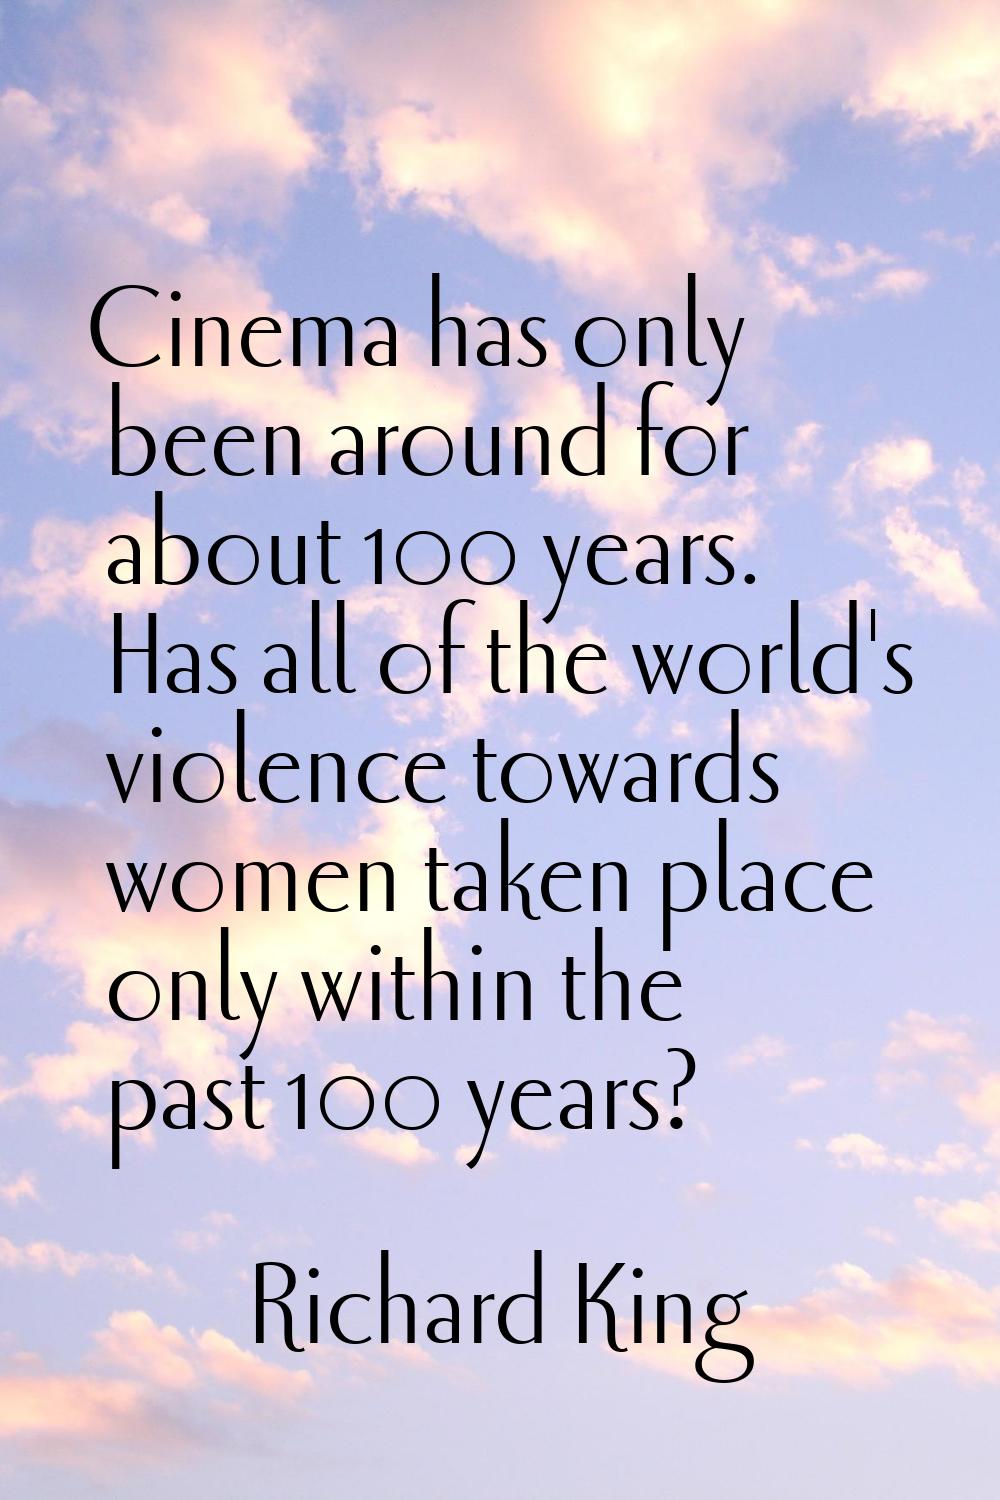 Cinema has only been around for about 100 years. Has all of the world's violence towards women take